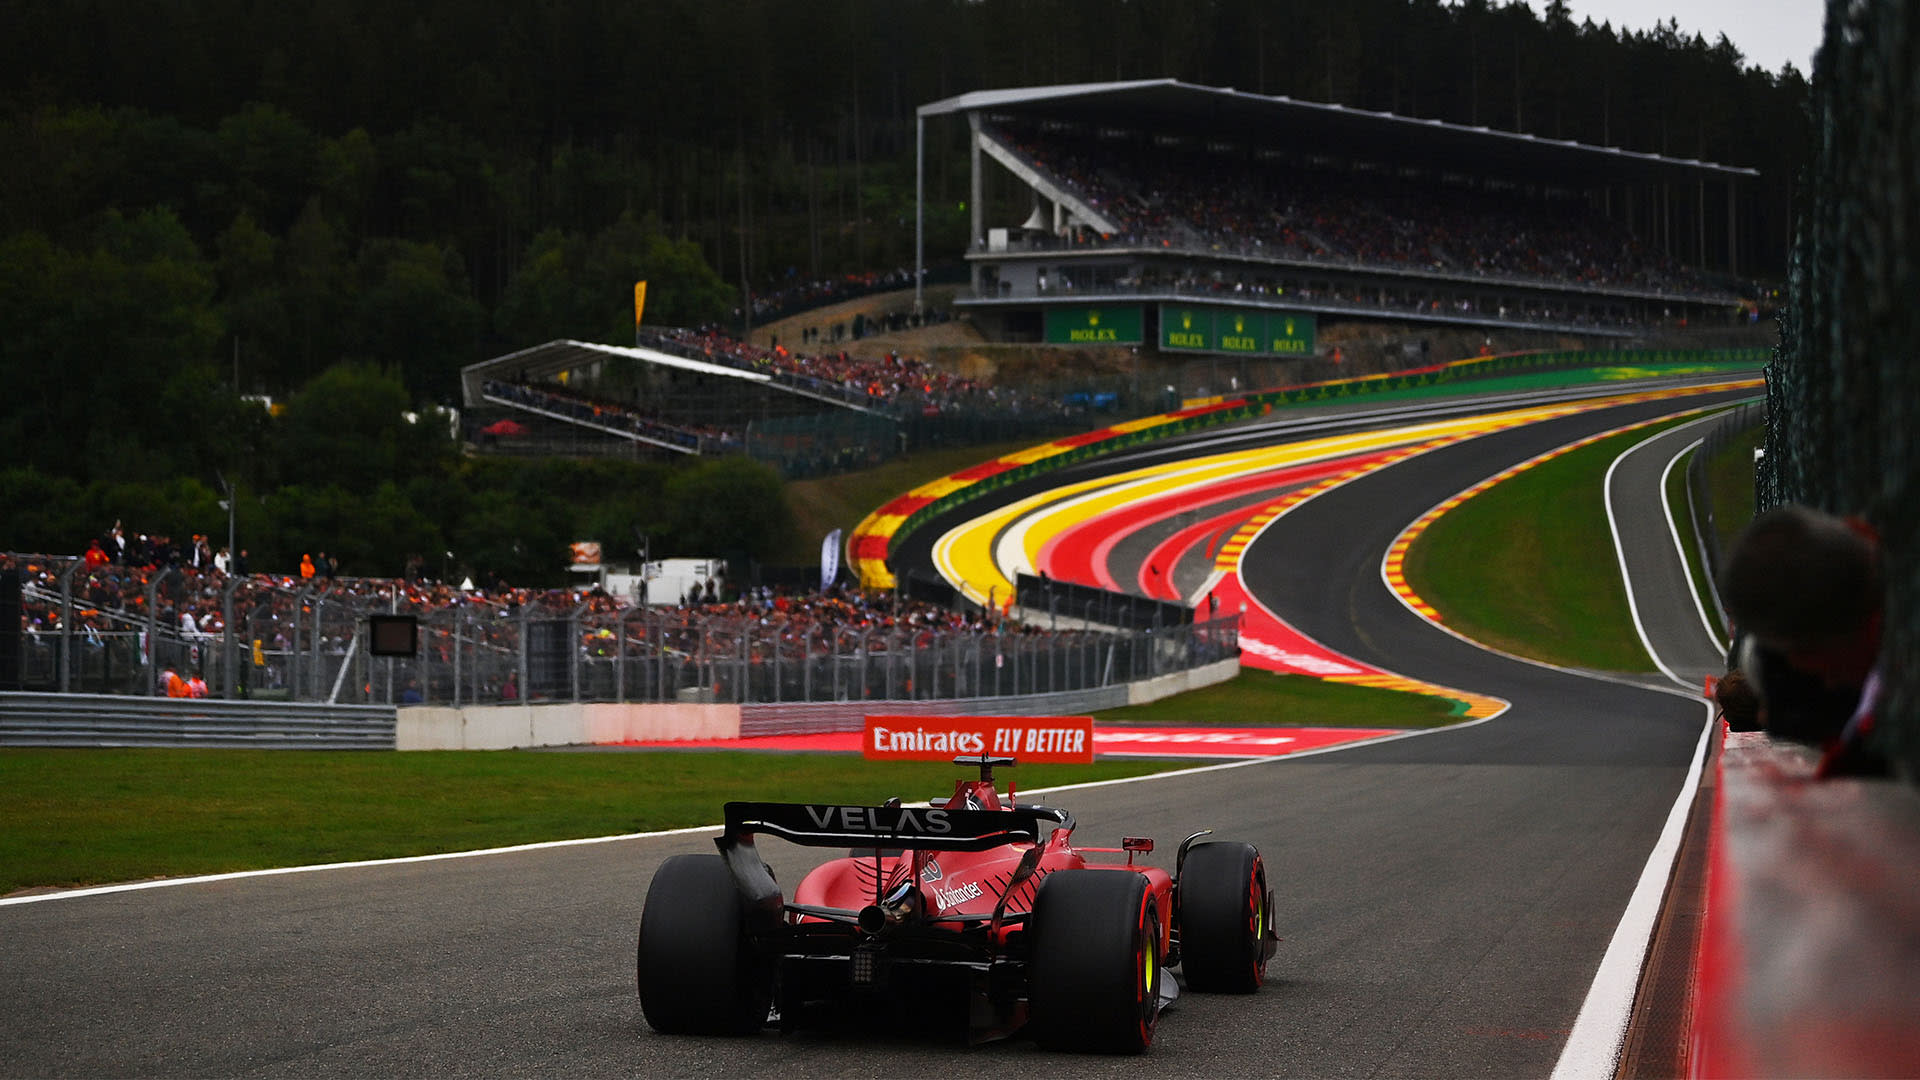 Spa to form part of 2023 F1 calendar following agreement to extend